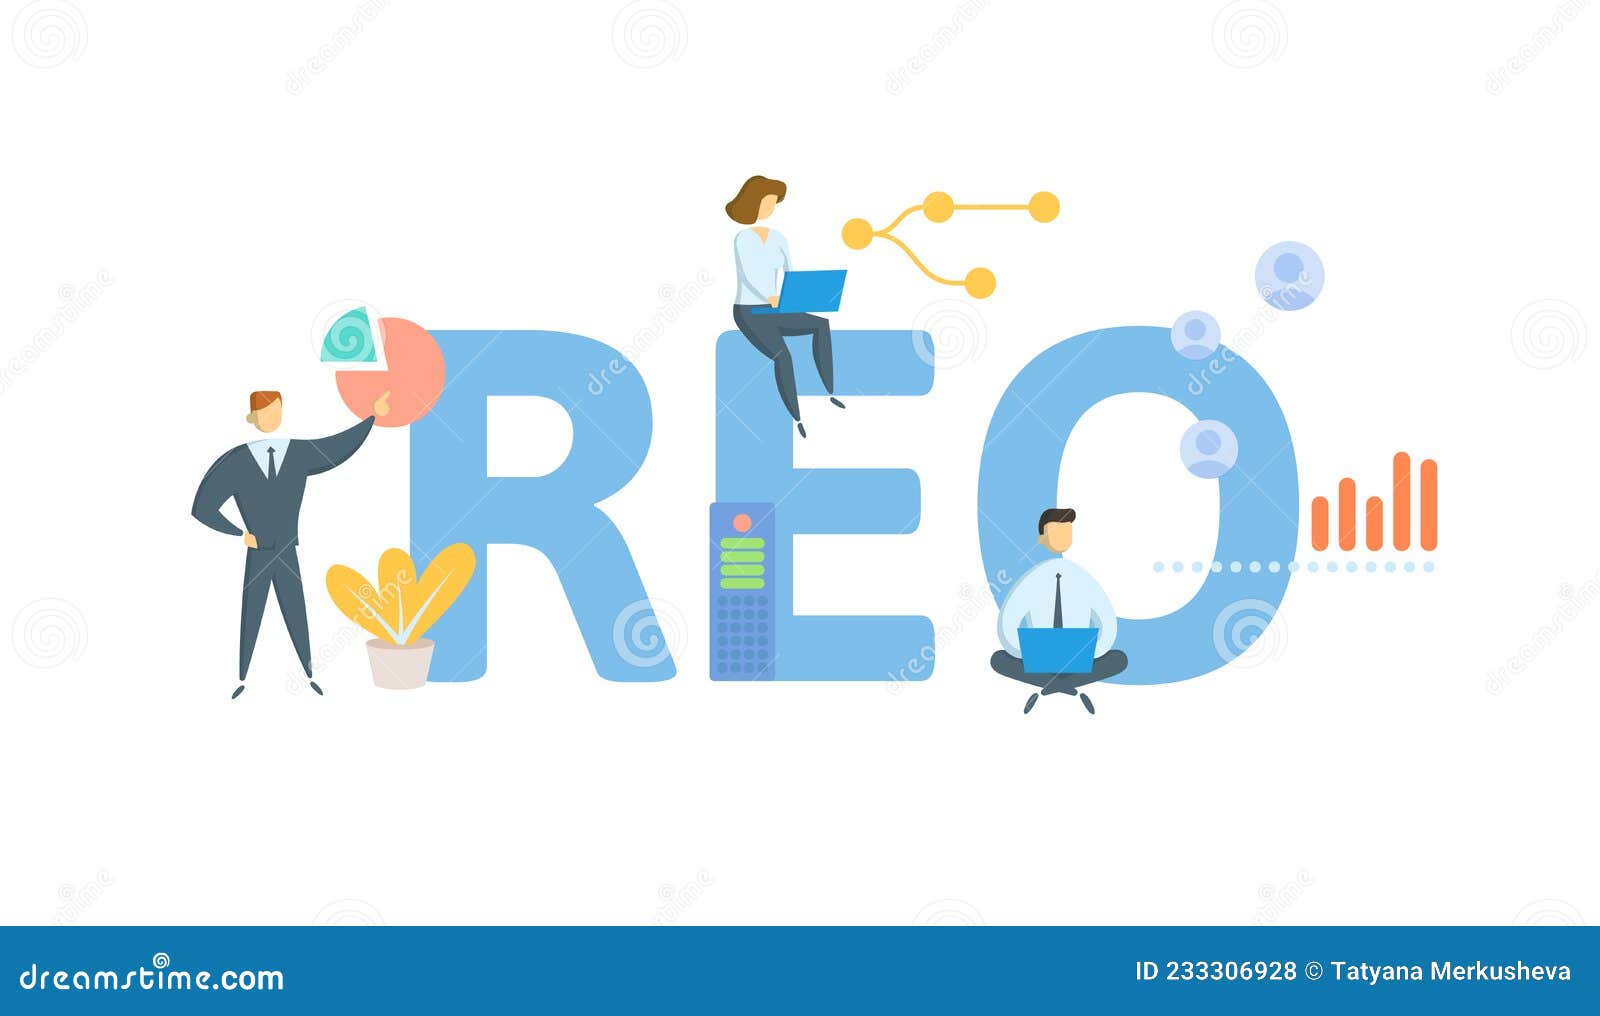 reo, real estate owned. concept with keyword, people and icons. flat  .  on white.